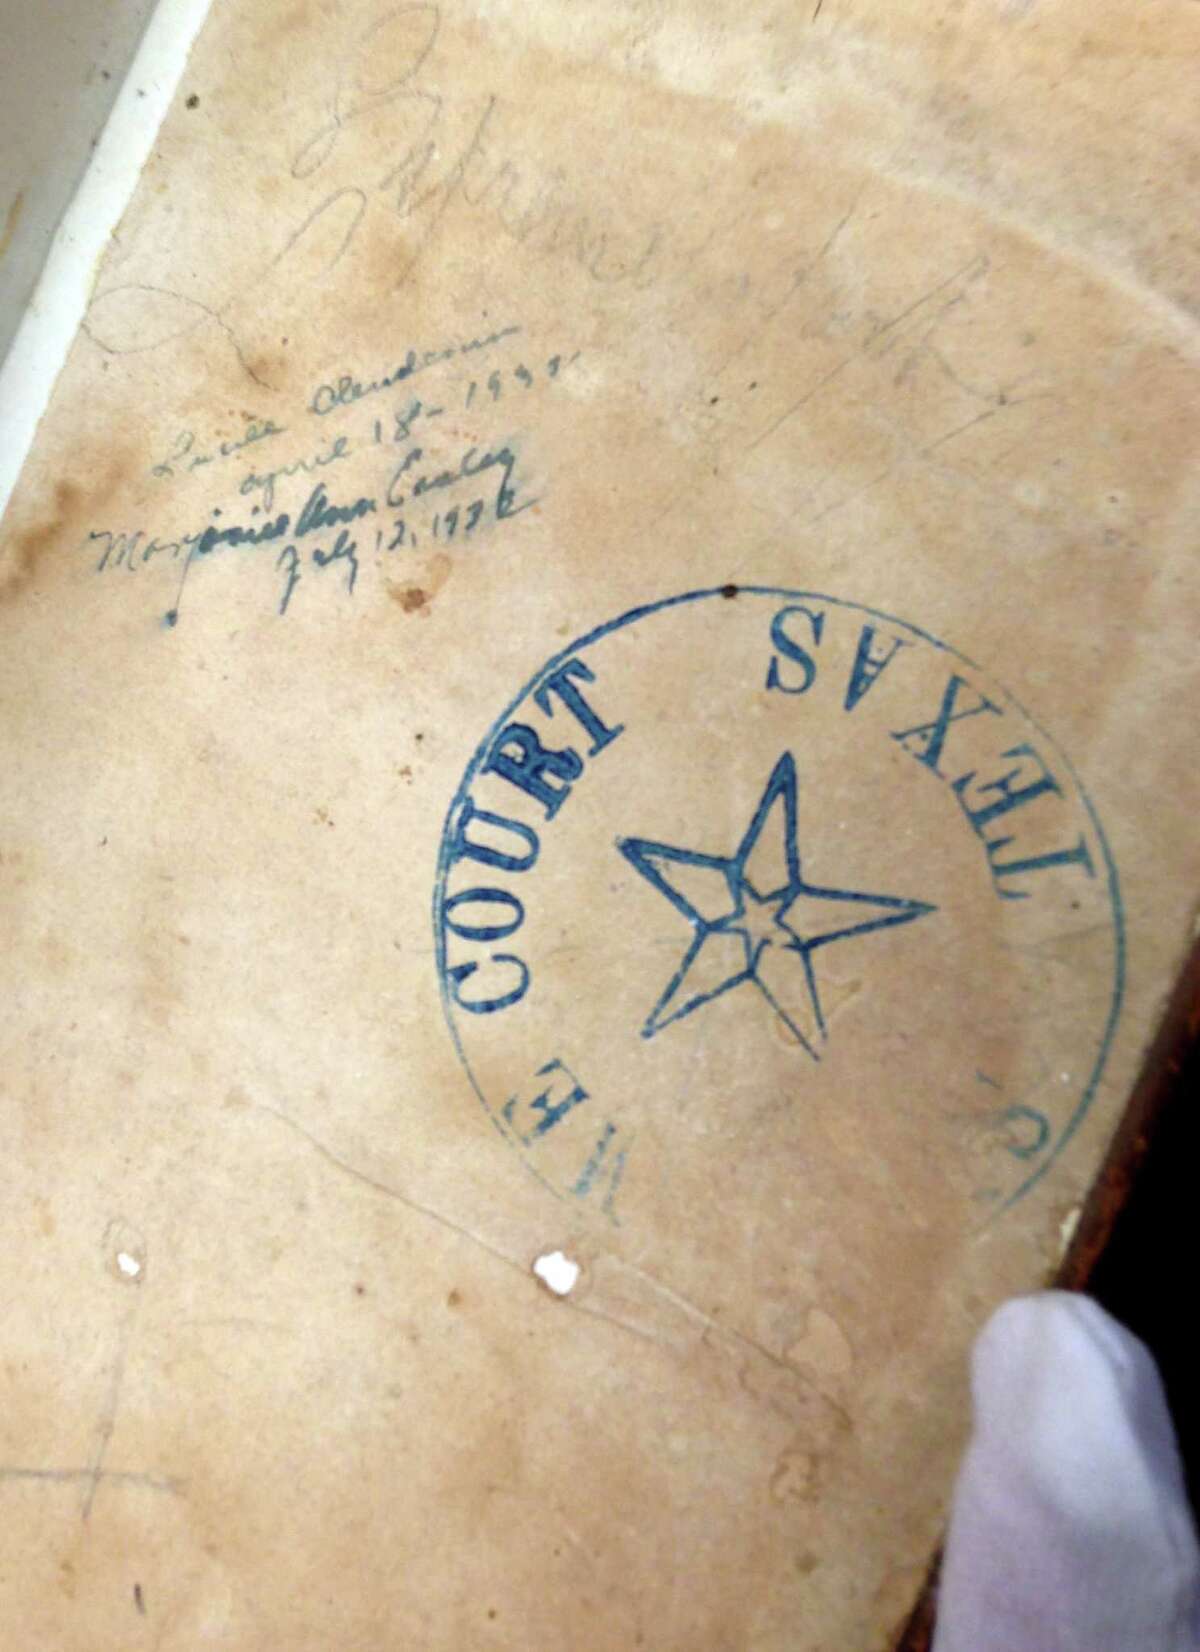 An old Texas Supreme Court stamp is among the markings in what is known as the Sam Houston Bible.